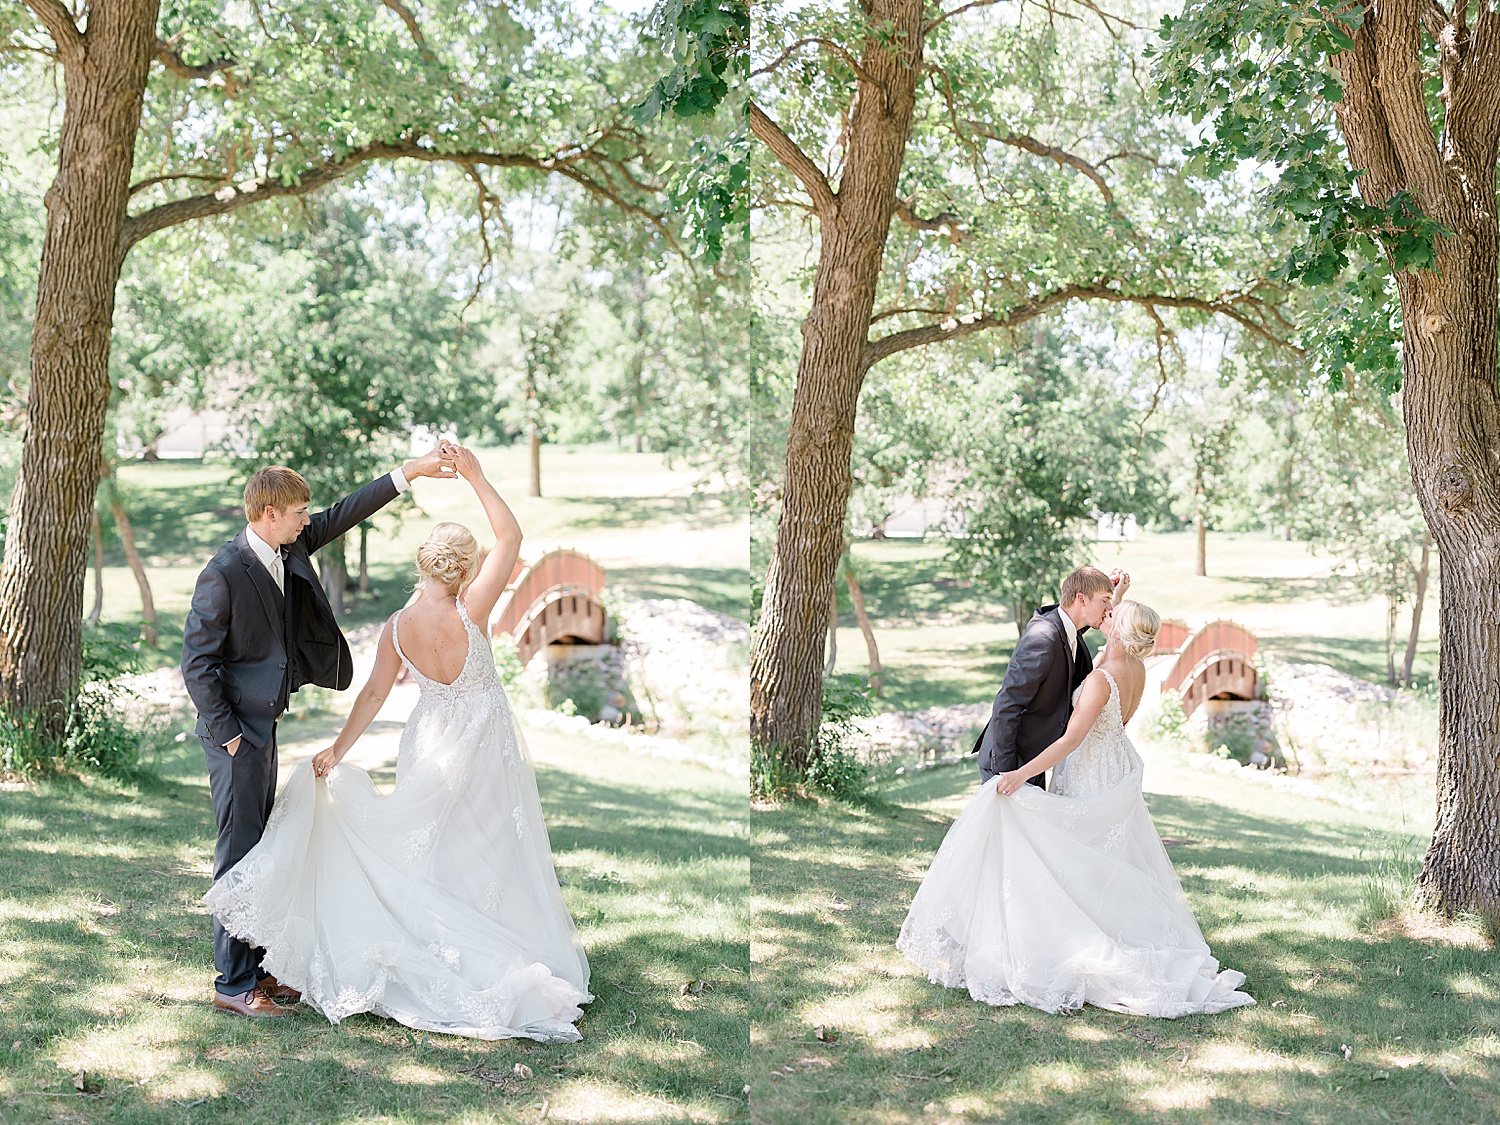 Groom spinning bride on a lawn for Hitching Post Minnesota Wedding